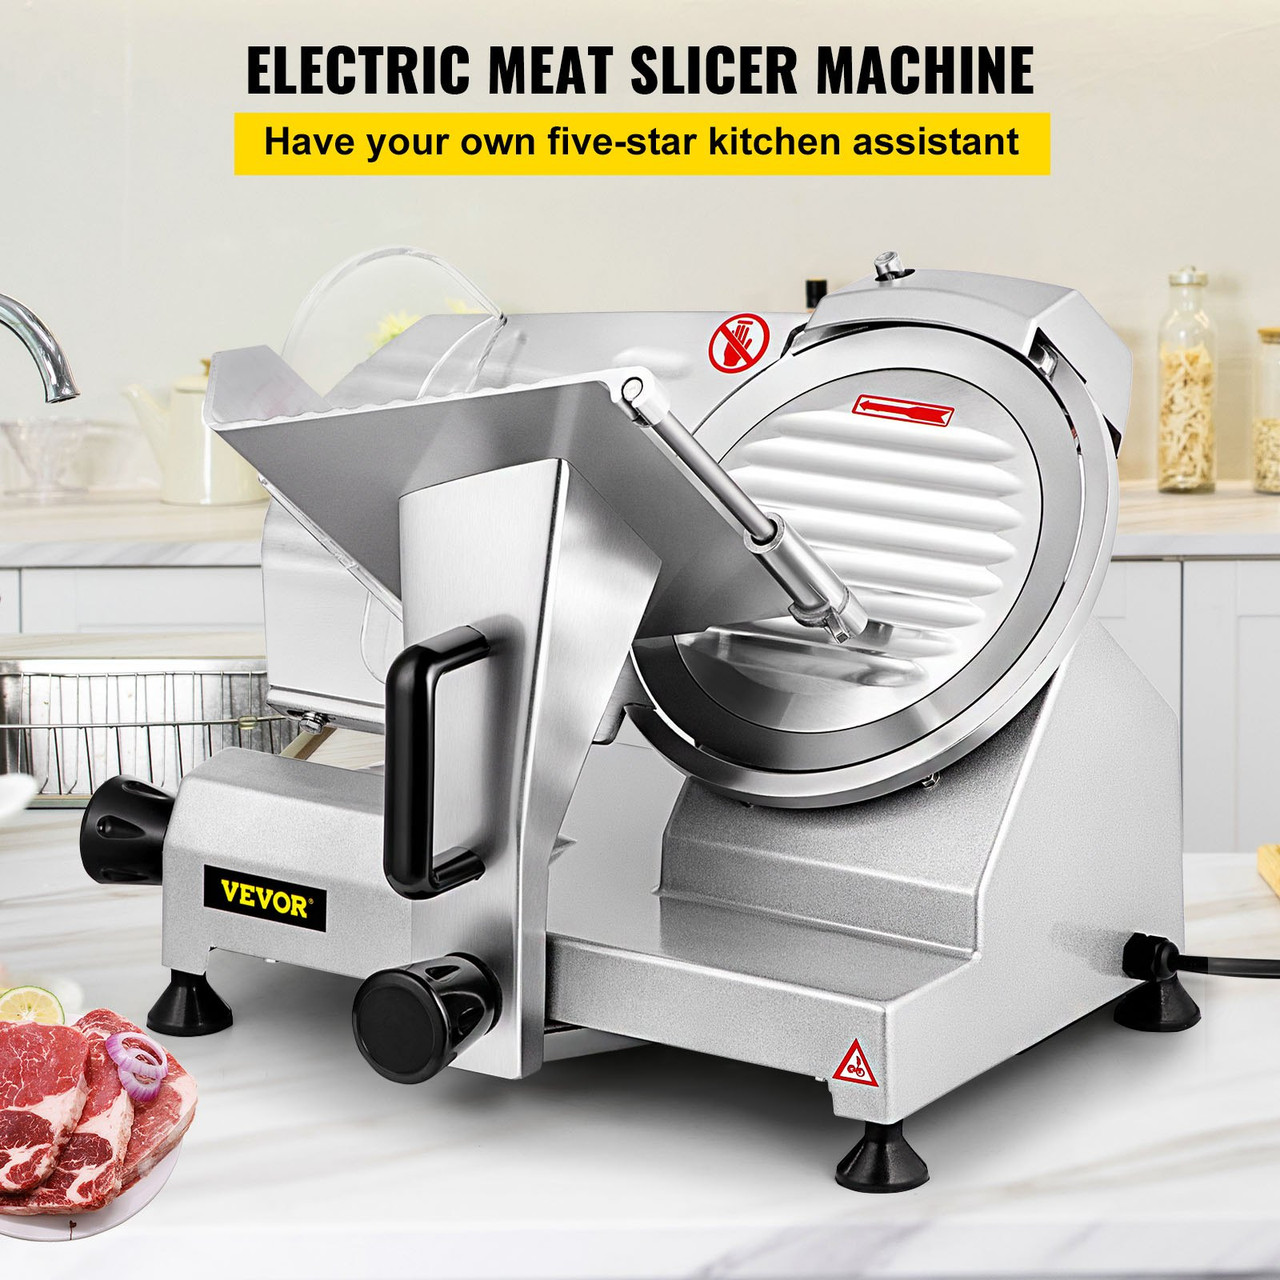 Commercial Meat Slicer, 240W Electric Deli Food Slicer, 1200RPM Meat Slicer with 8'' Chromium-plated Steel Blade, 0-12mm Adjustable Thickness Electric Meat Slicer for Home & Commercial Use